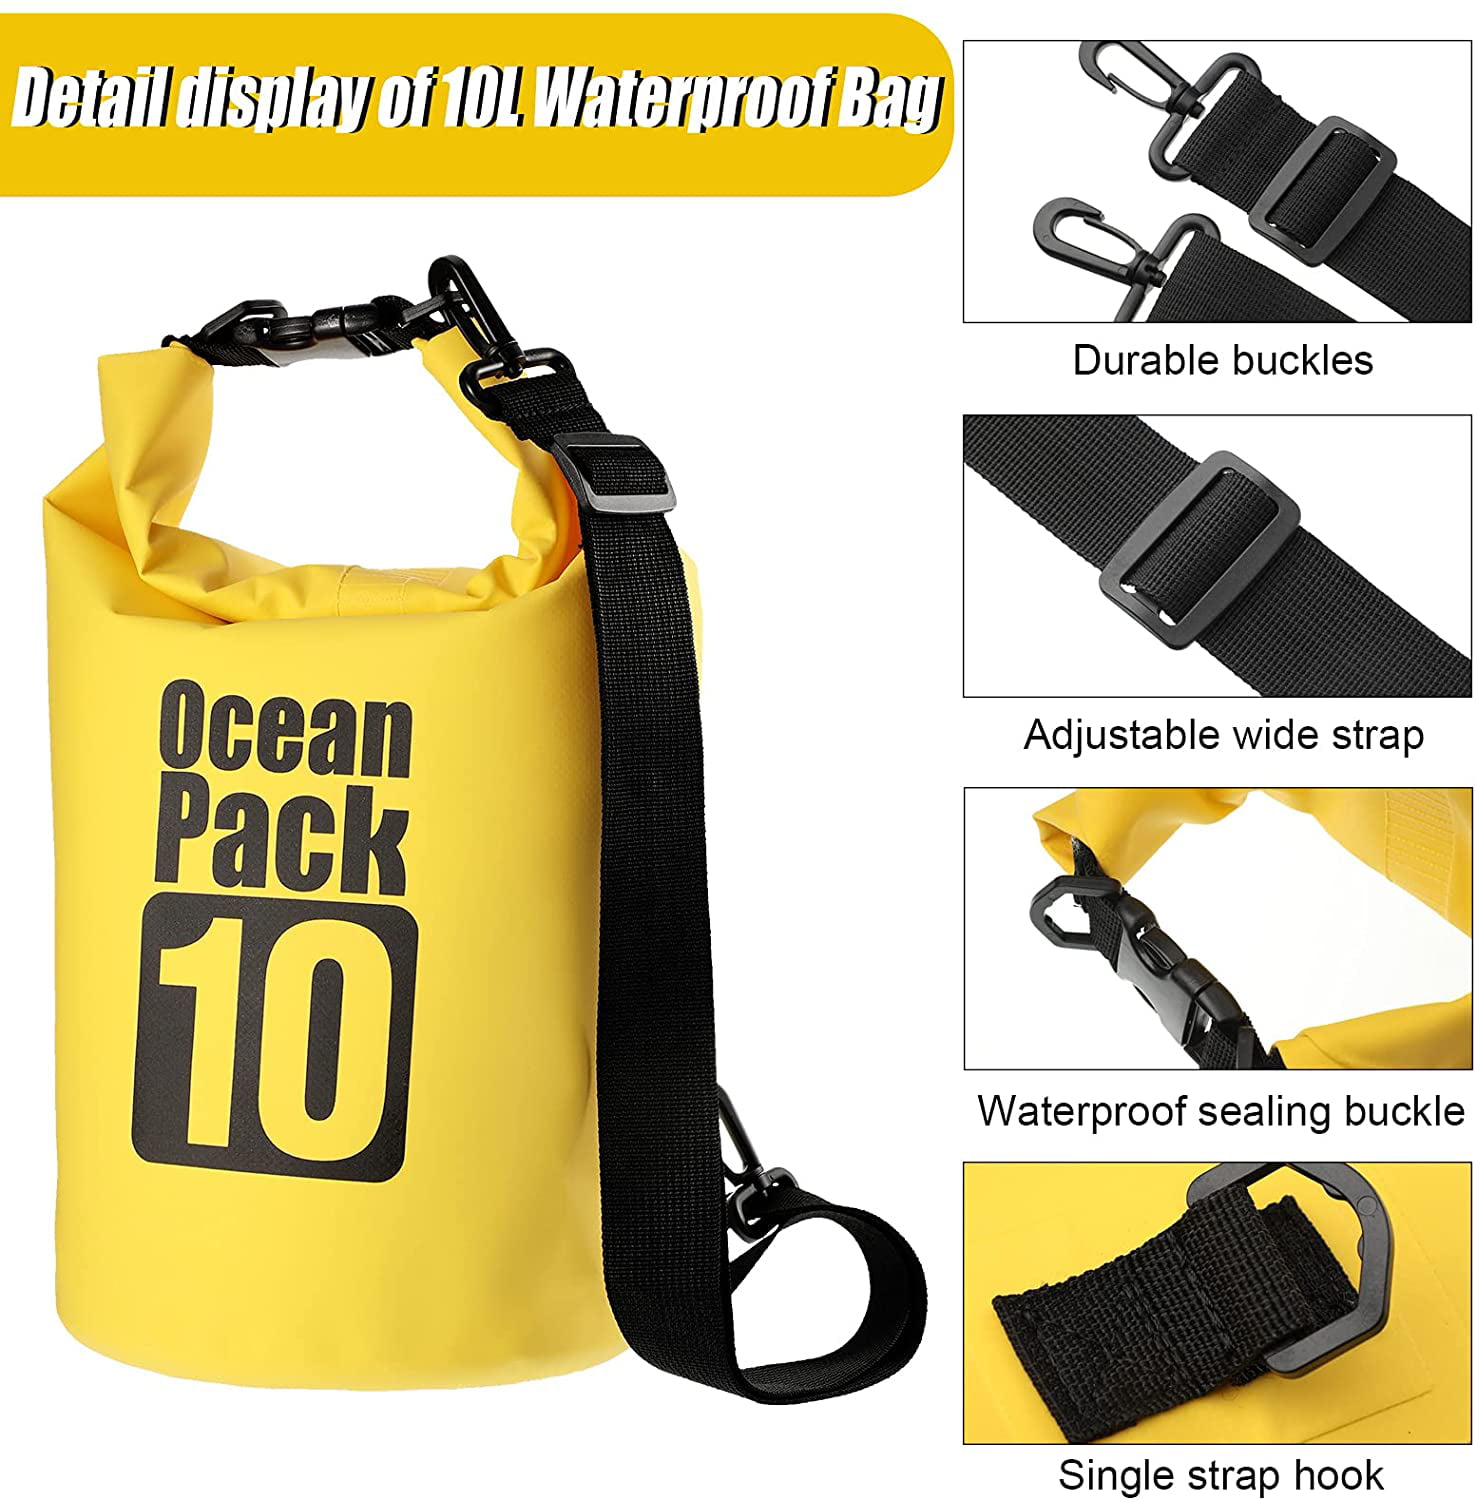 3 Pieces Clear Waterproof Bag Pouch Watertight Dry Pouch Dry Phone Bag and 1 Piece 10L Roll Top Waterproof Dry Sack Waterproof Dry Bag for Swimming Boating Beach Kayaking Hiking Rafting Camping